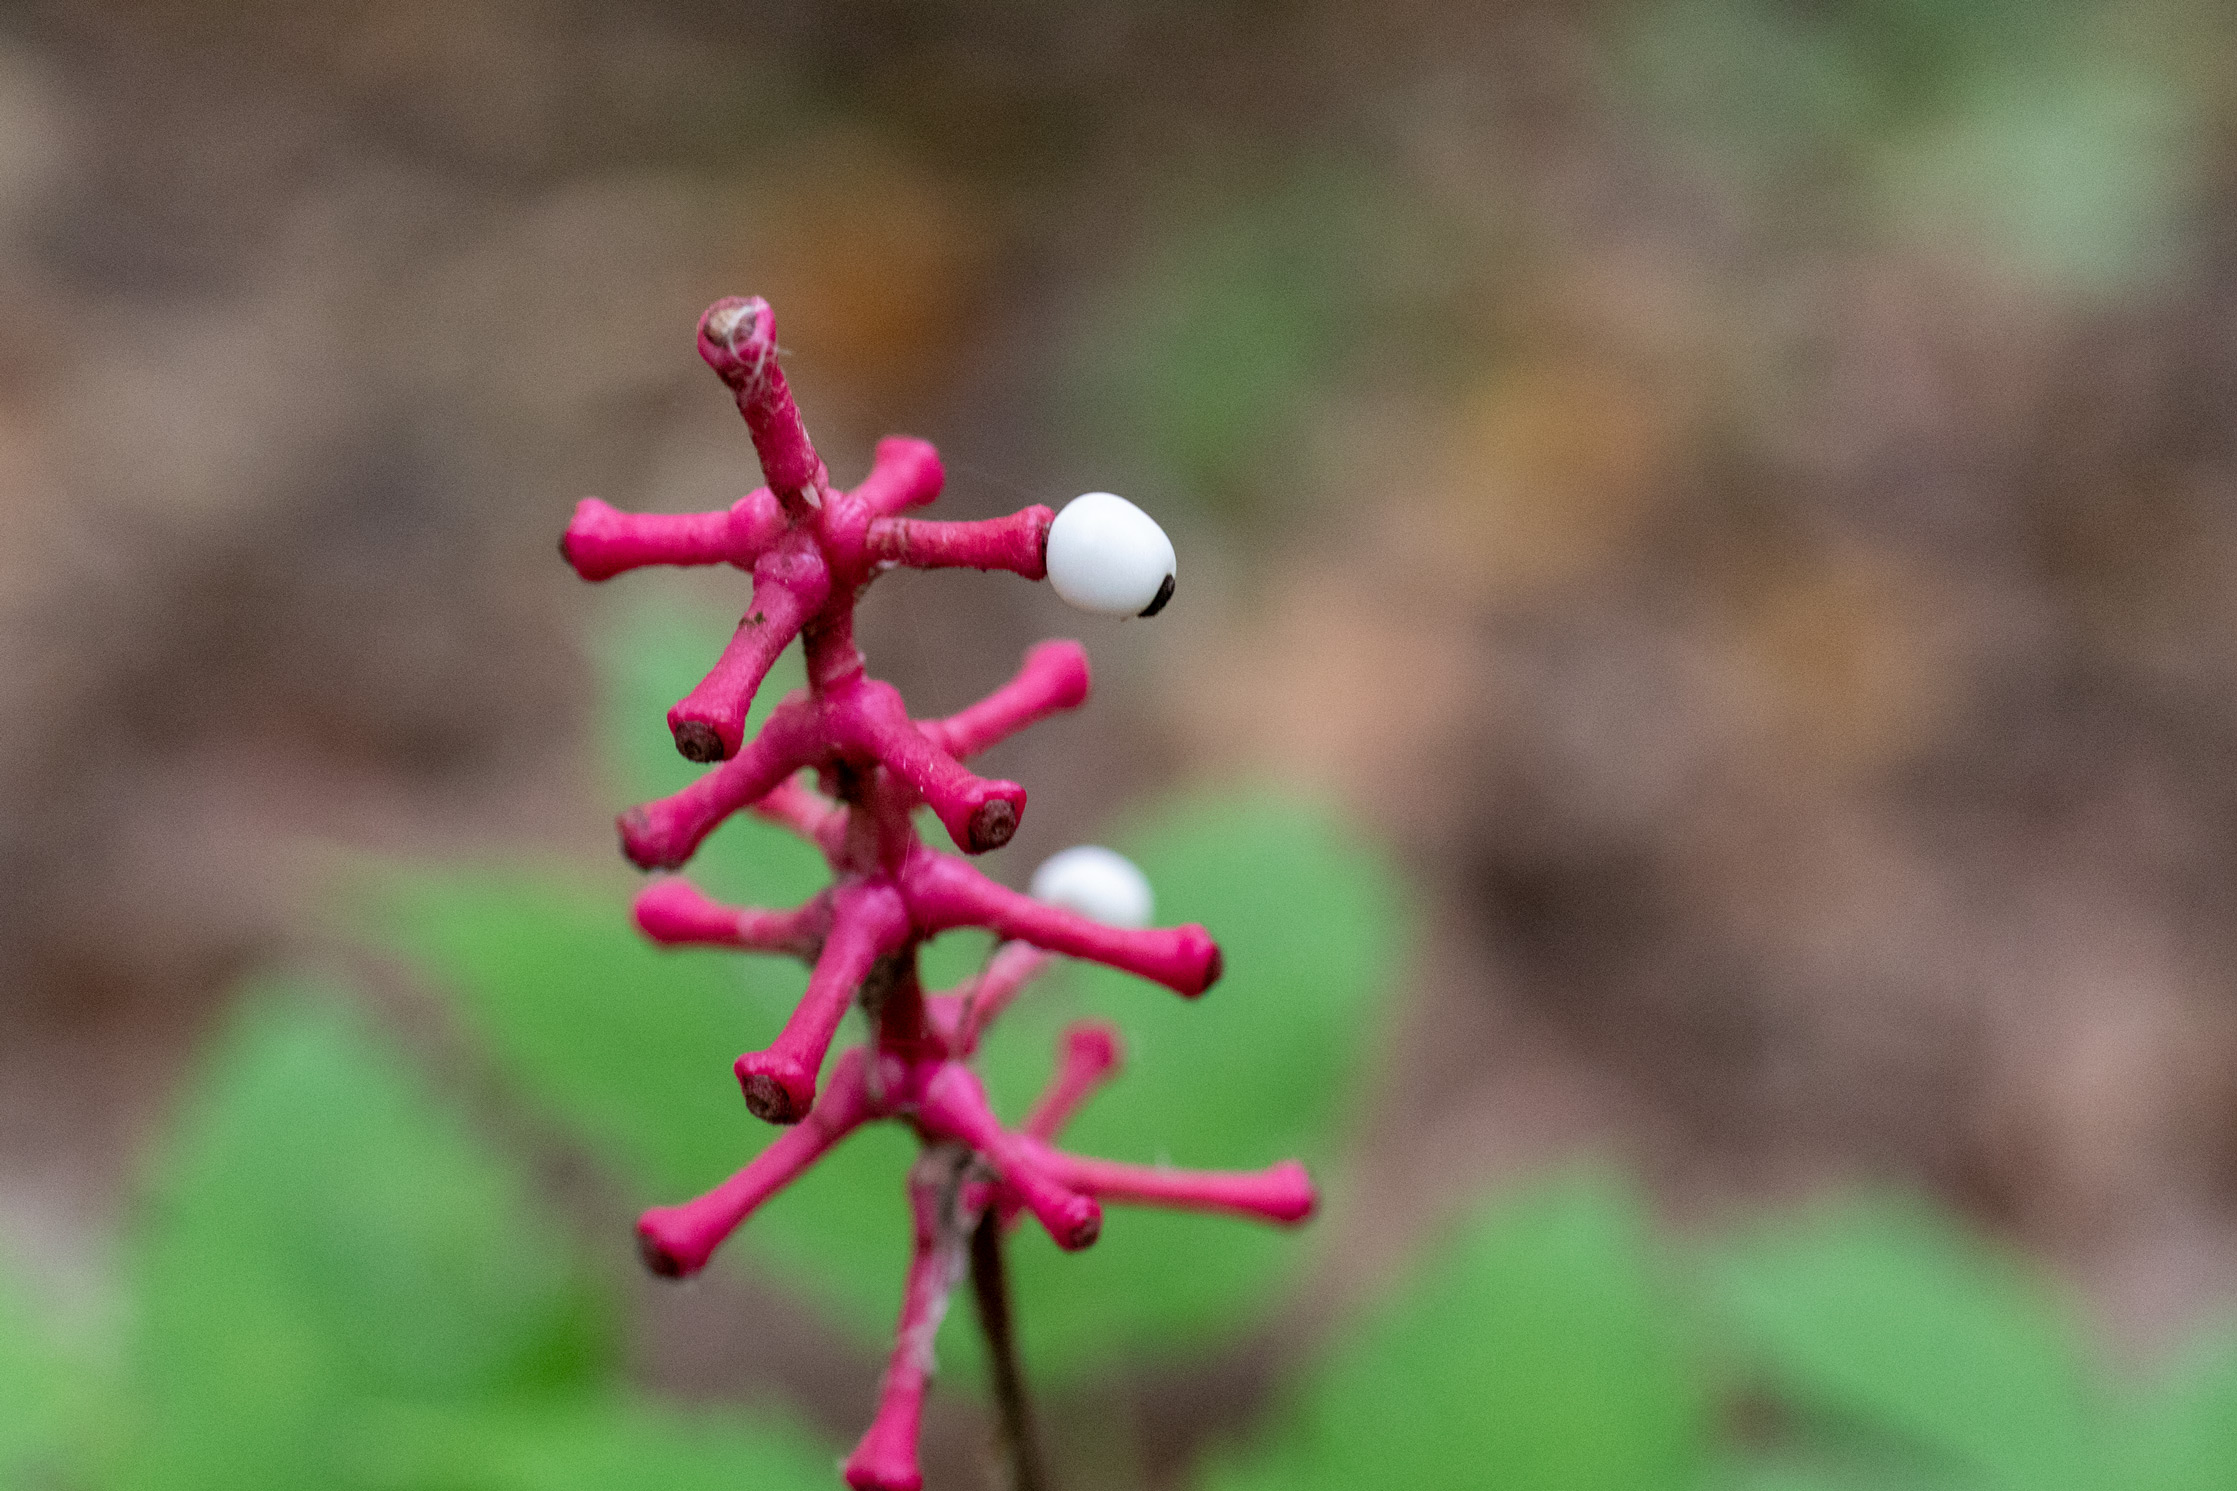 White berry on a strange red plant